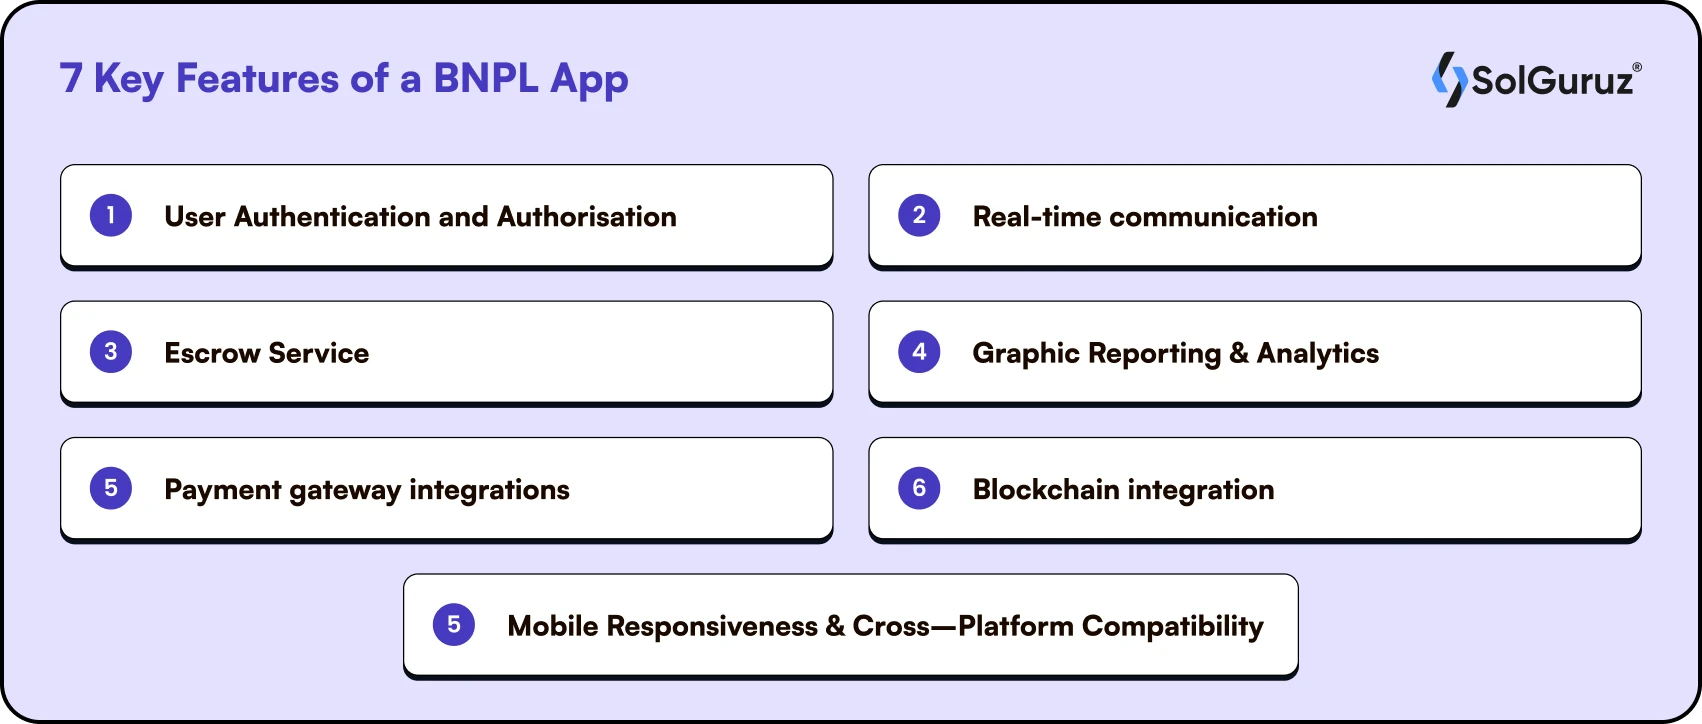 7 Key Features of a BNPL App Which Are Must for BNPL App Development